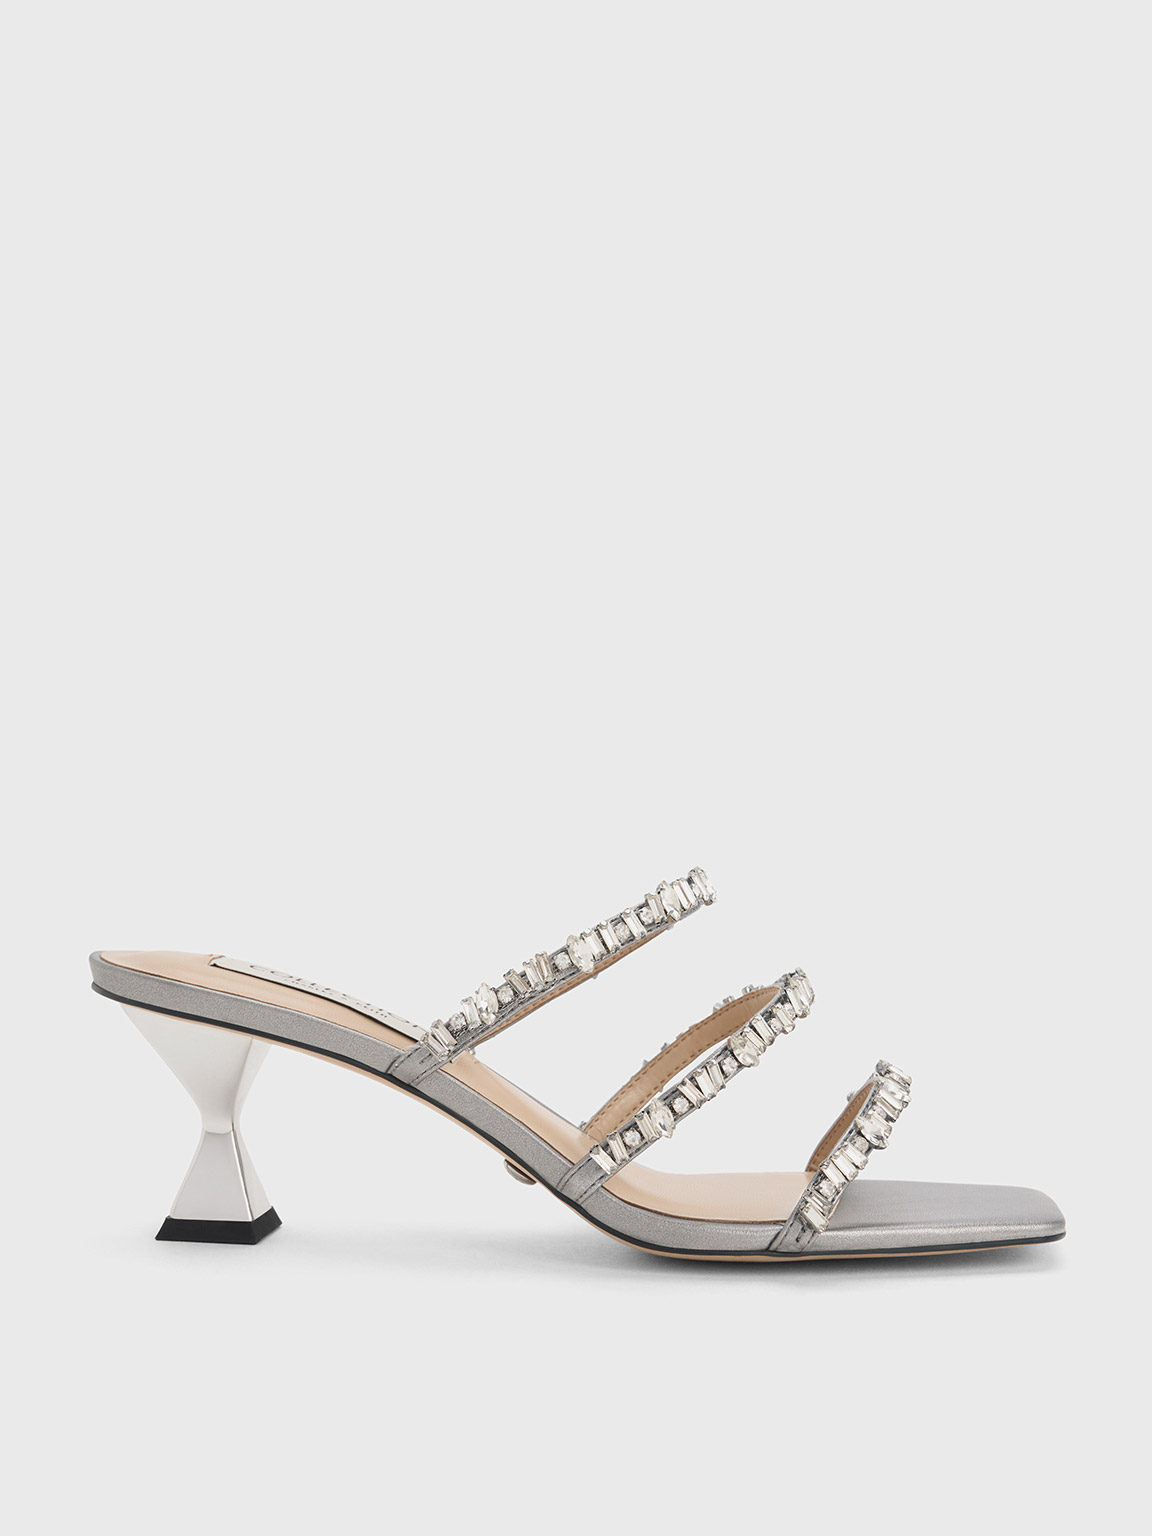 Silver Gem-Encrusted Metallic Strappy Sandals - CHARLES & KEITH US